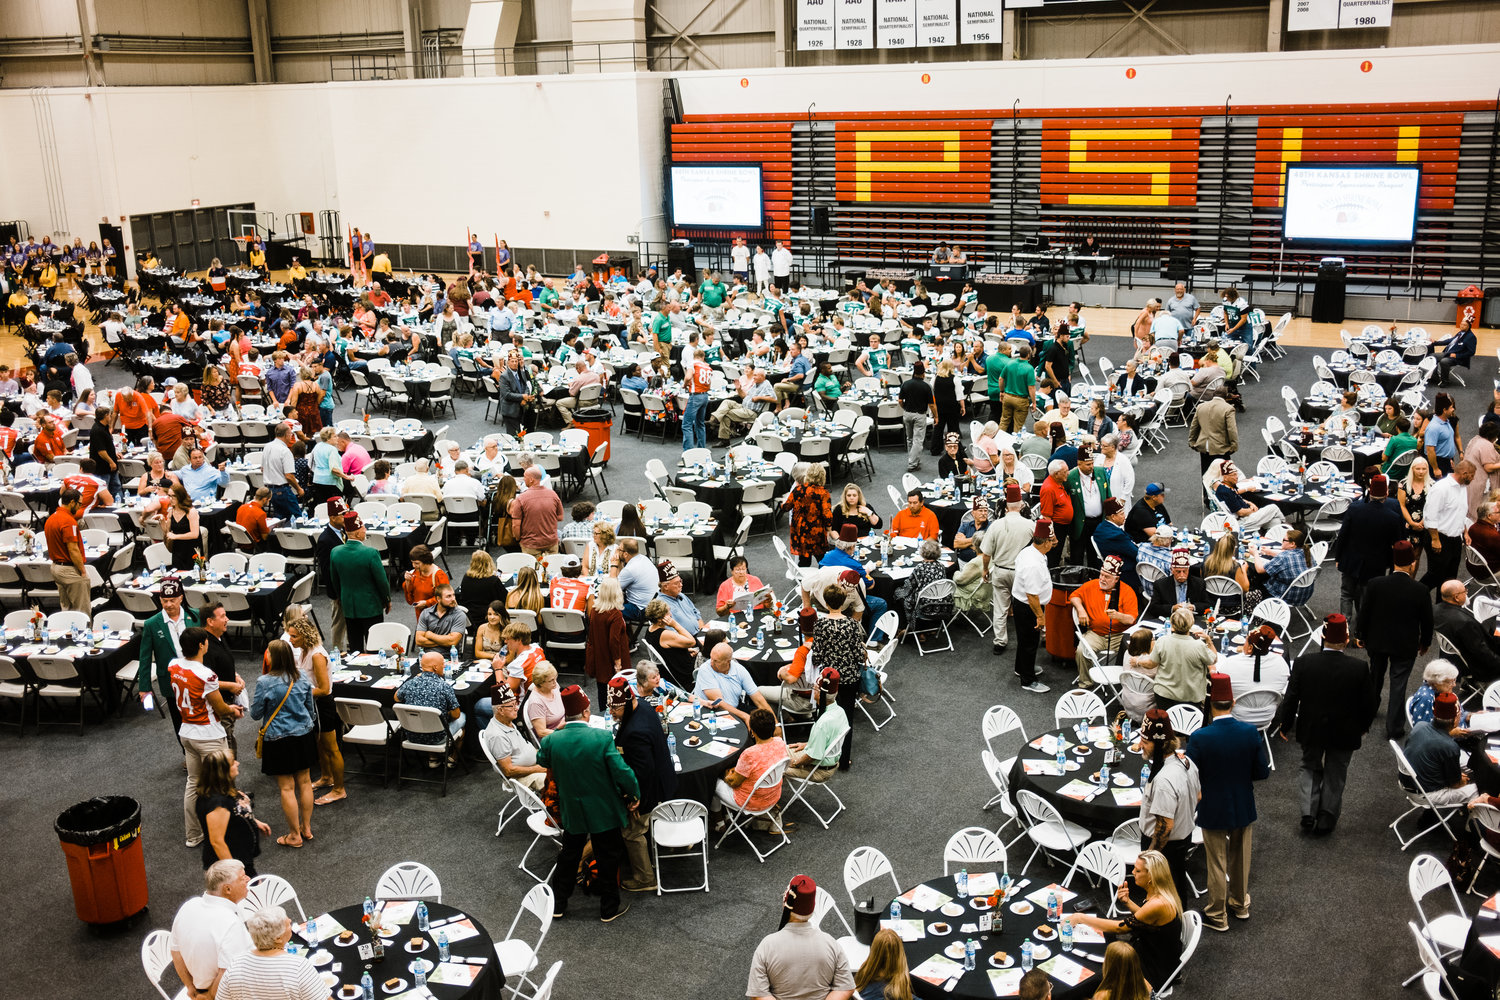 Guests filled the John Lance Arena for the 49th Kansas Shrine Bowl Banquet on Friday. Proceeds from the weekend’s events will go to Shriners Hospitals for children and their parents.